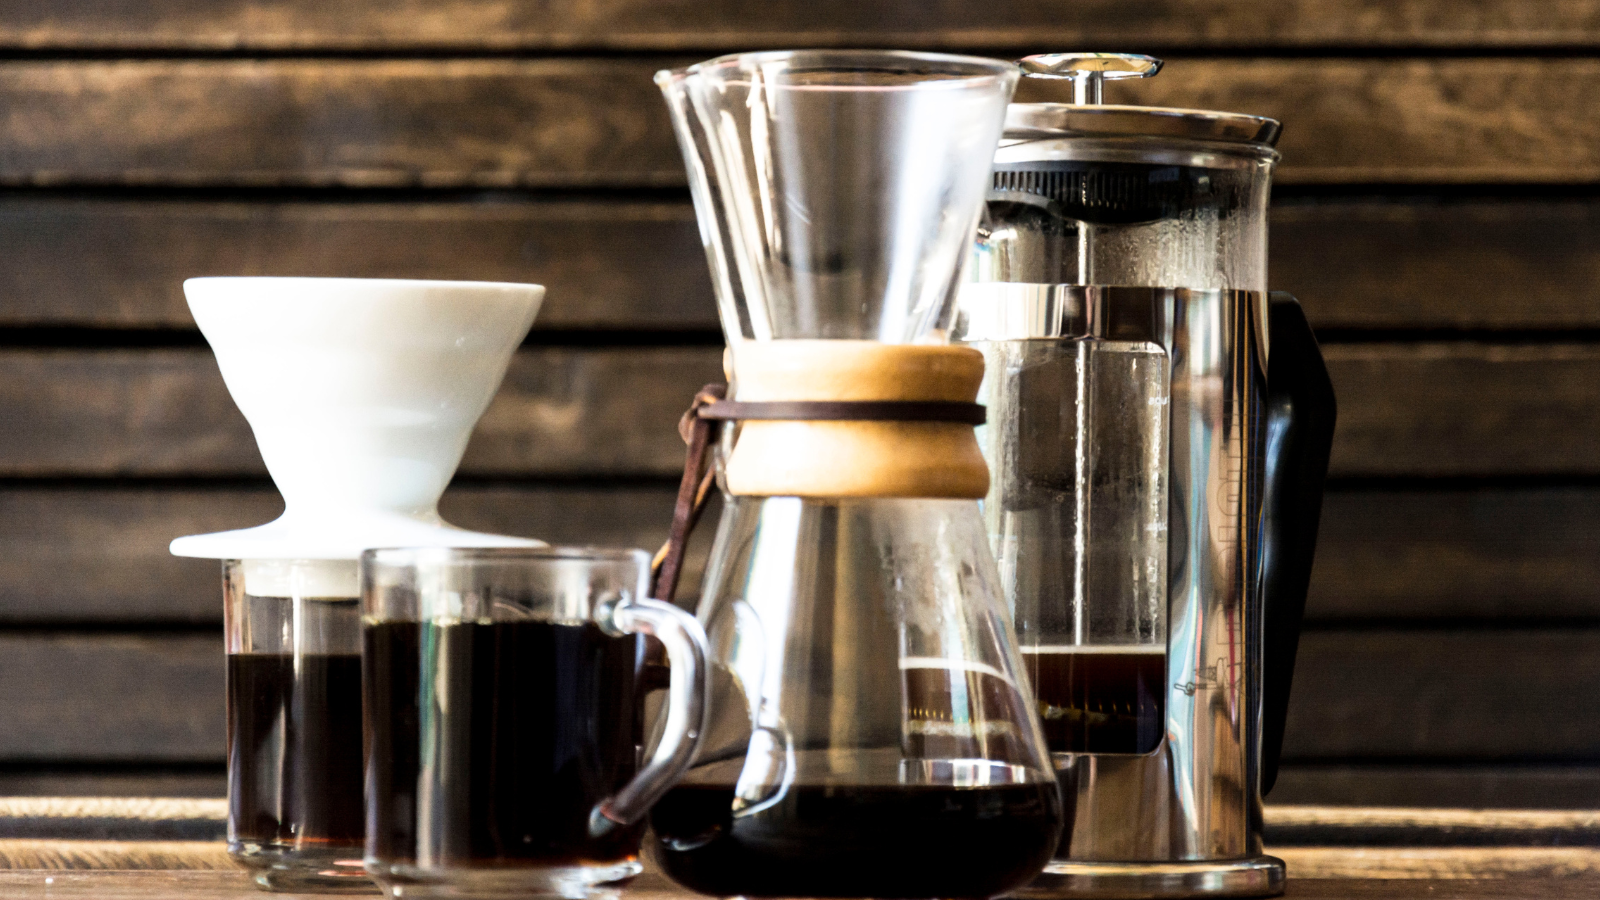 Coffee filters and un-filtered coffee brewing